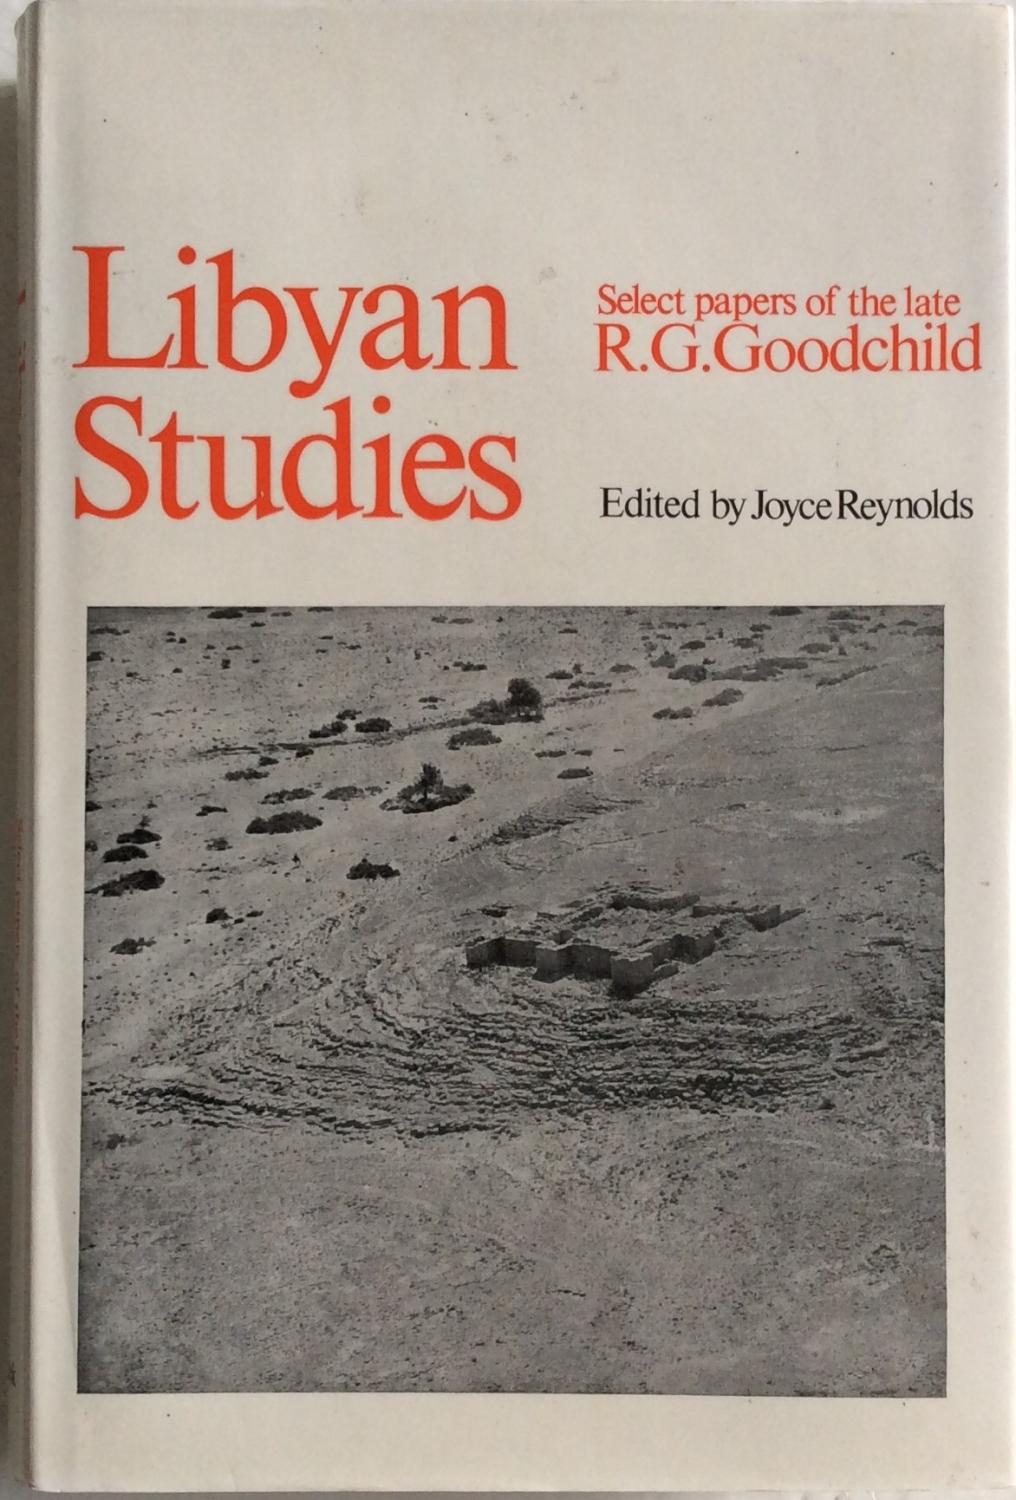 LIBYAN STUDIES SELECT PAPERS OF THE LATE R.G. GOODCHILD. - Reynolds, Joyce.